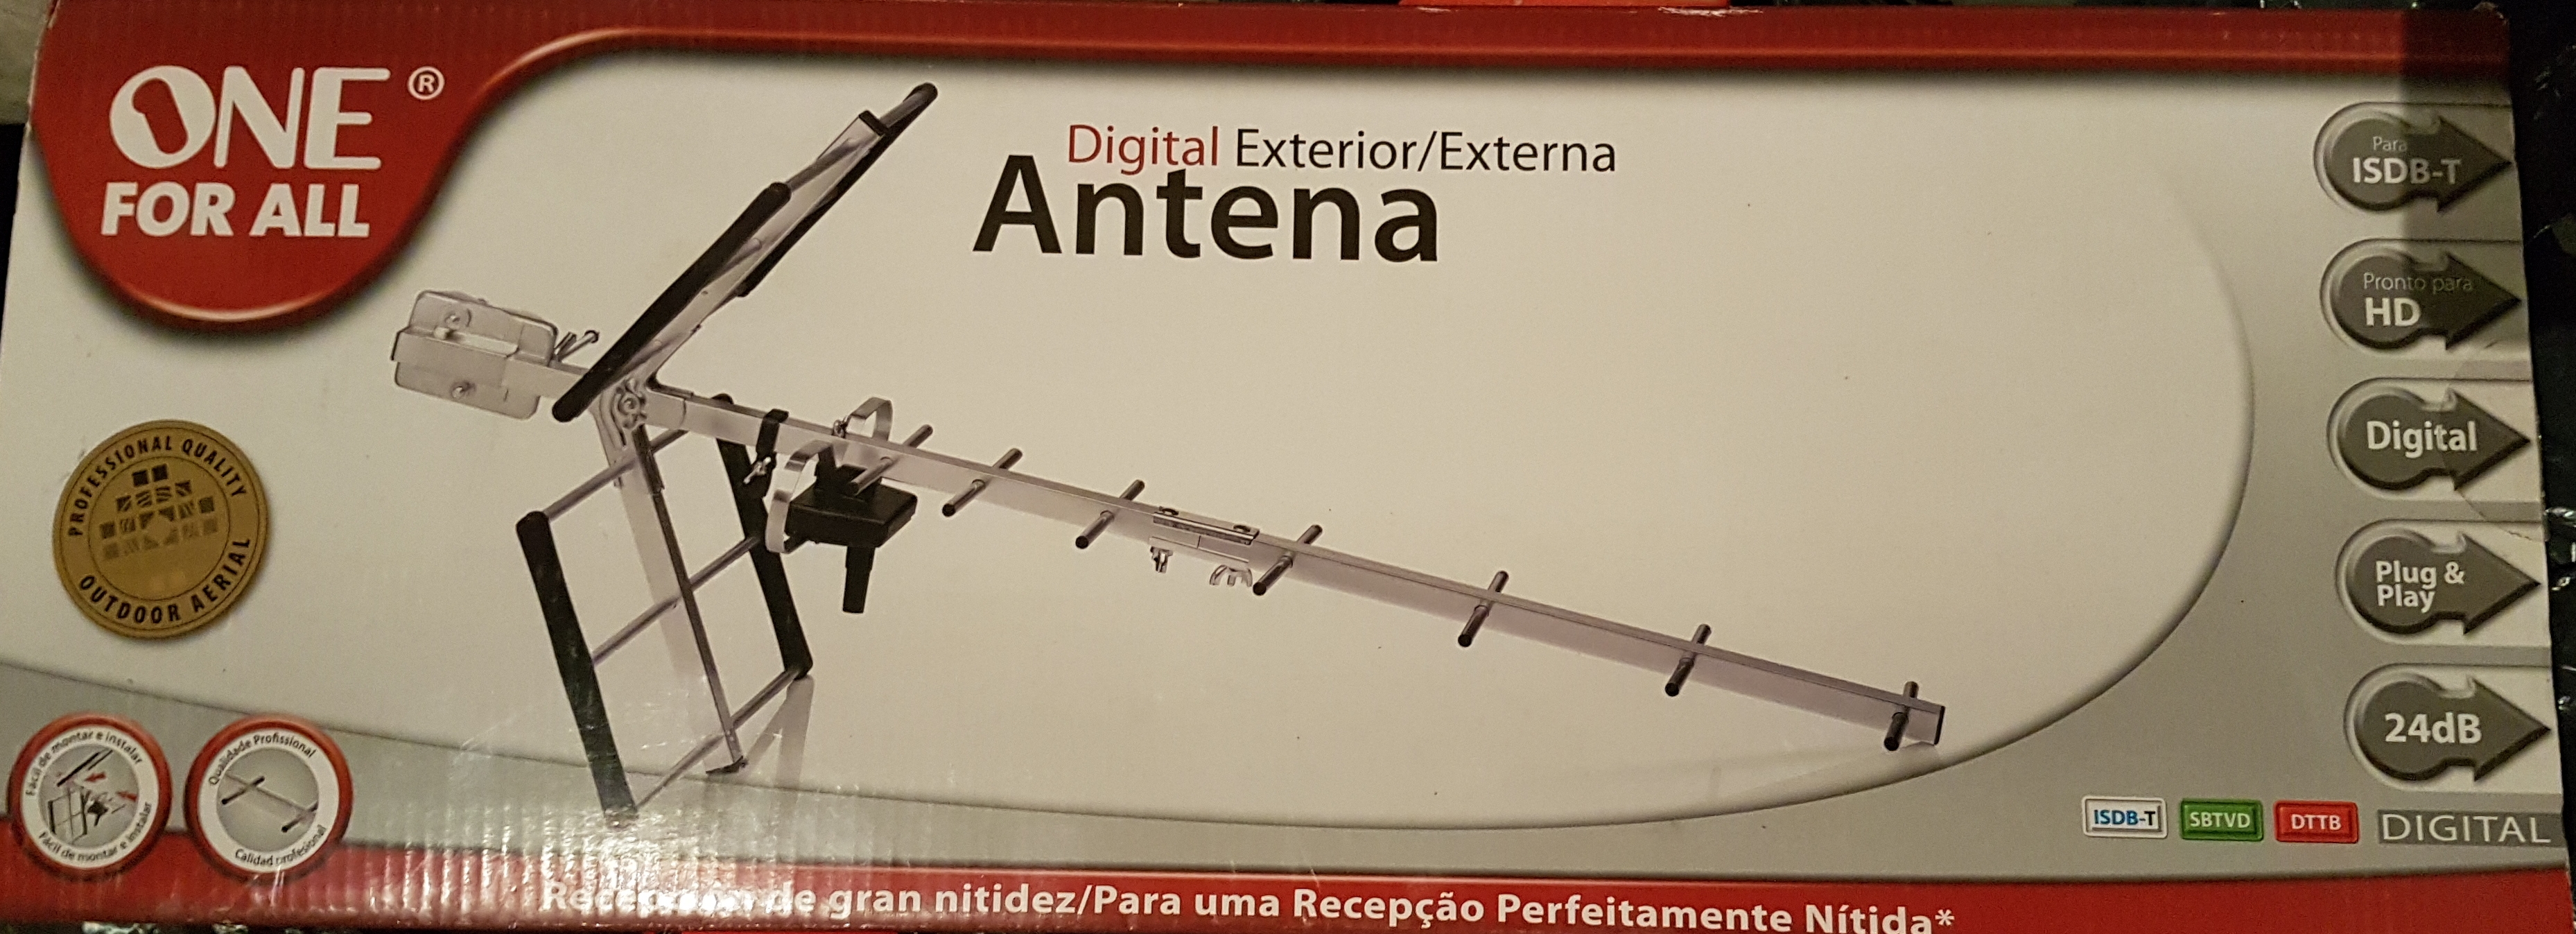 Antena One for all